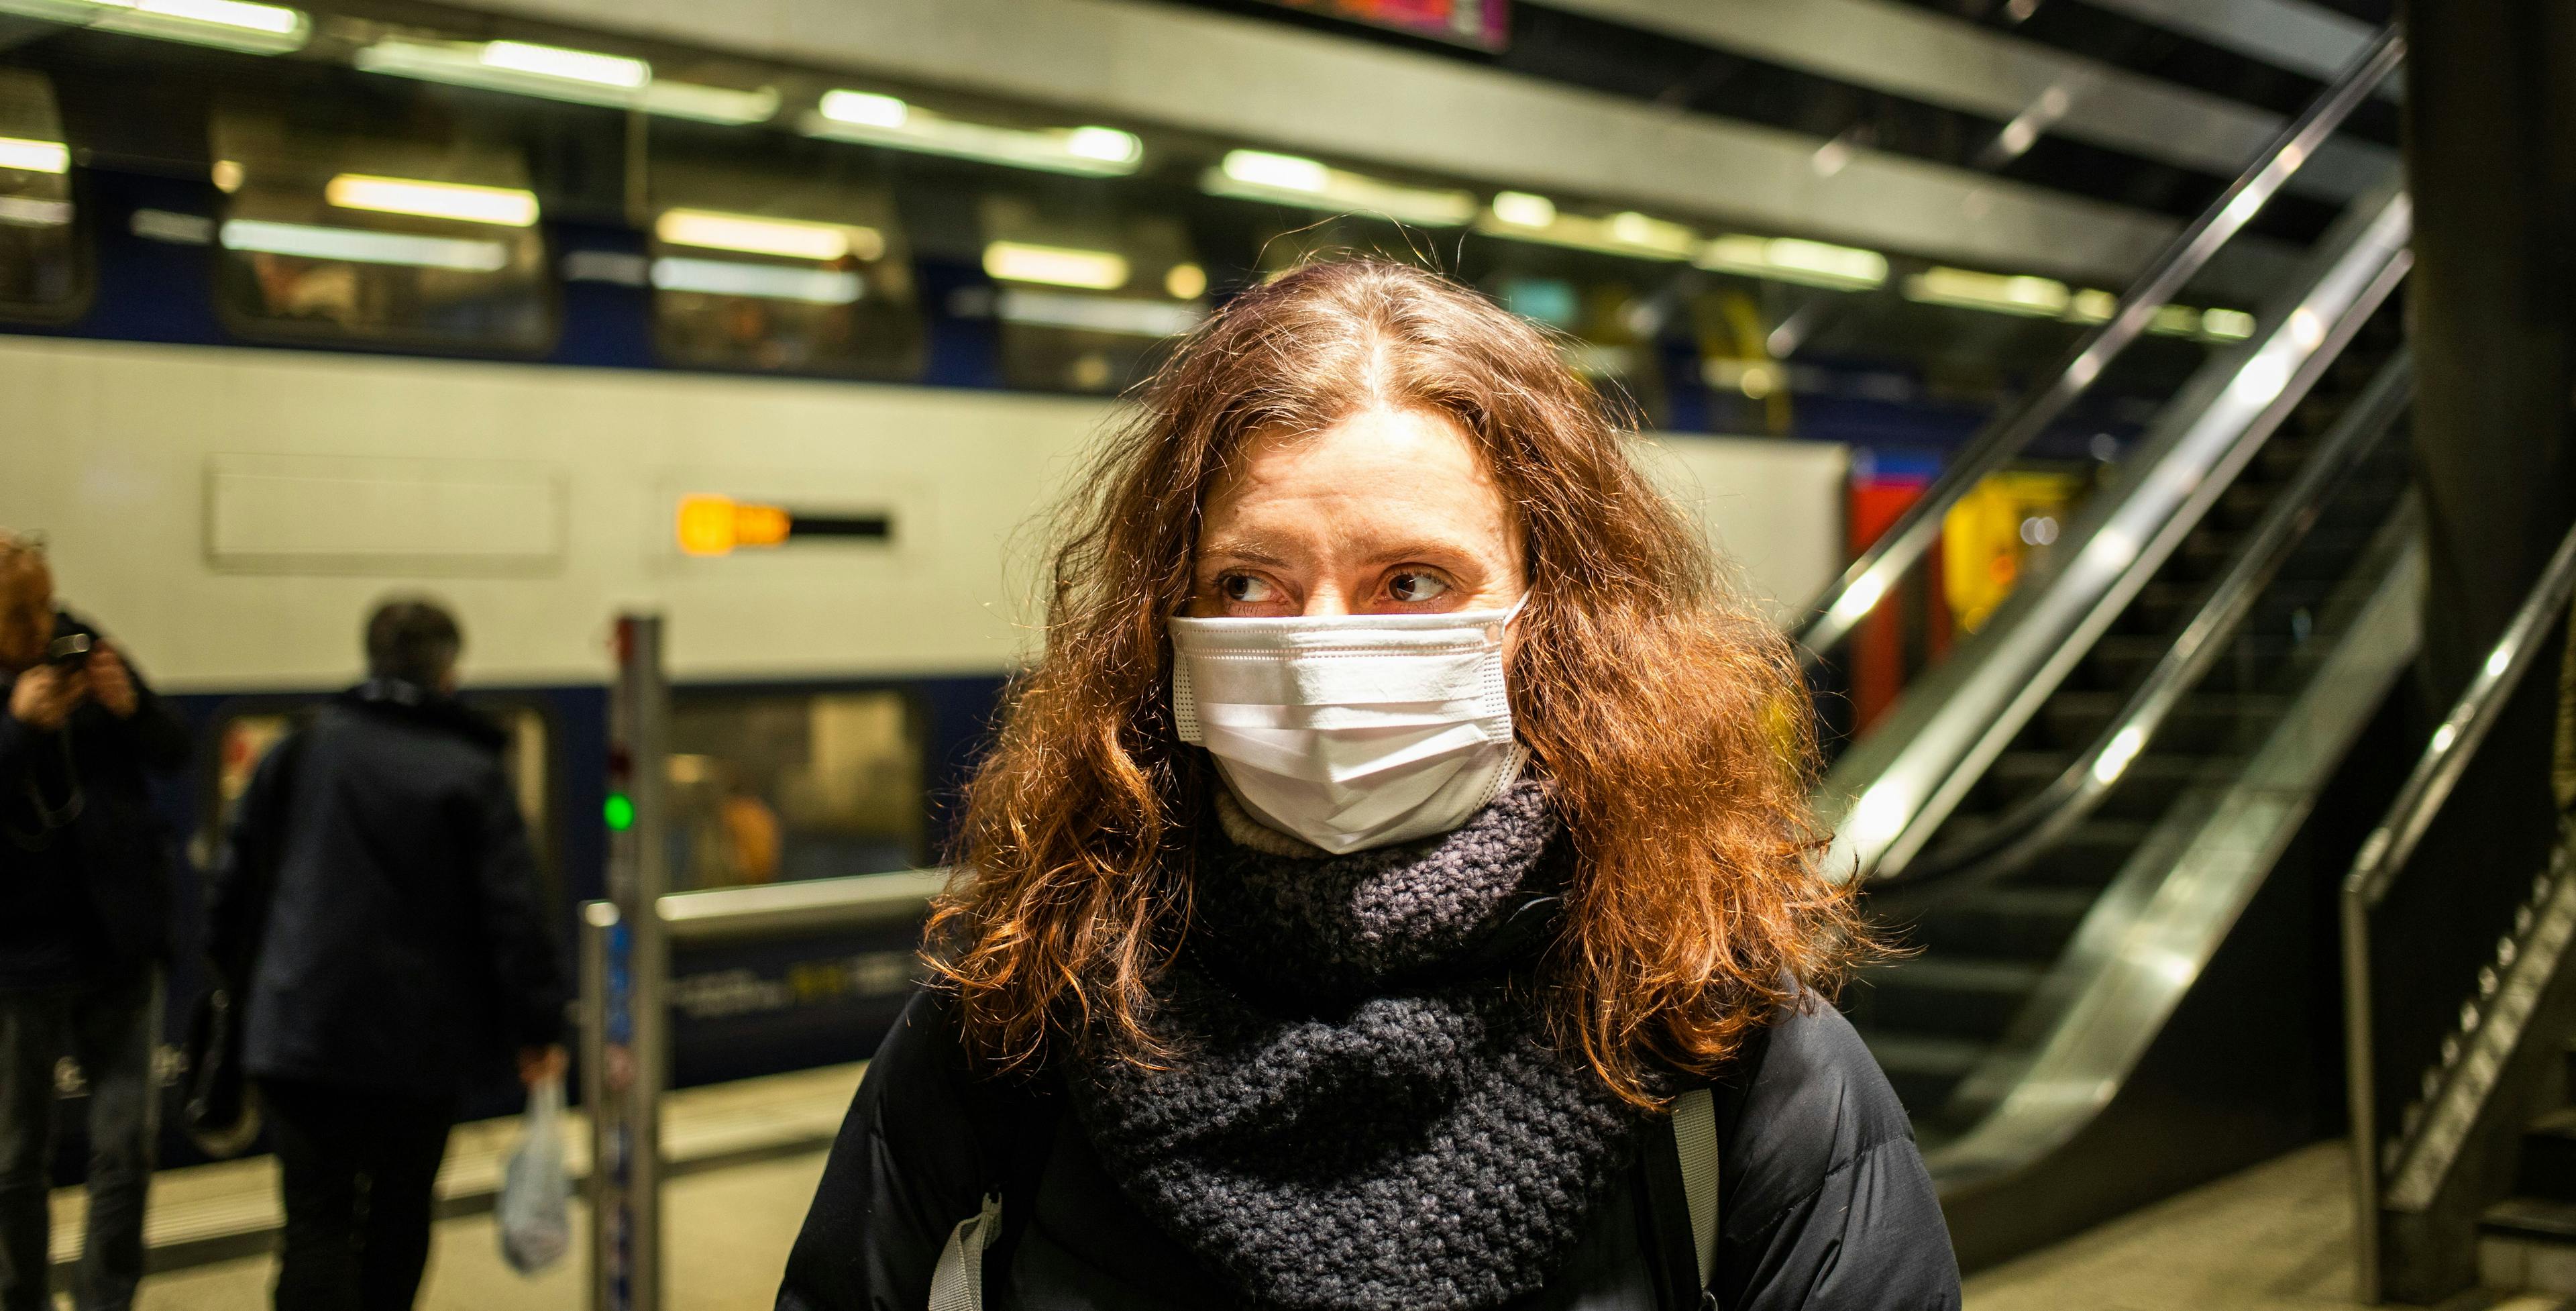 A woman wearing a mask at a train station.